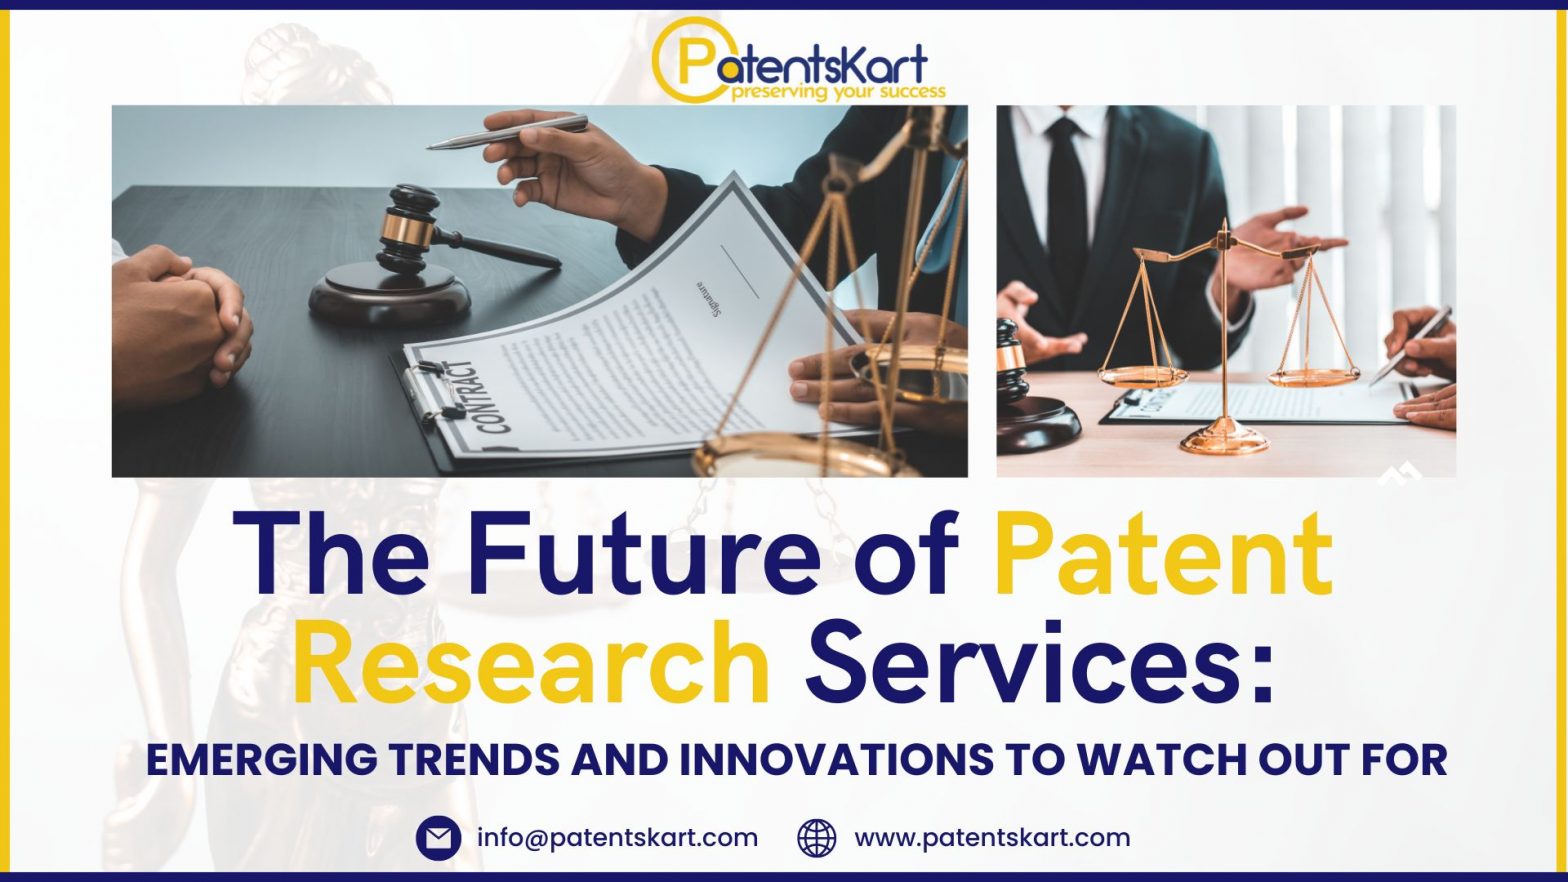 Patent Research Services patent support services ip support services patent prosecution support technology landscape analysis patent analytics services patent watch services